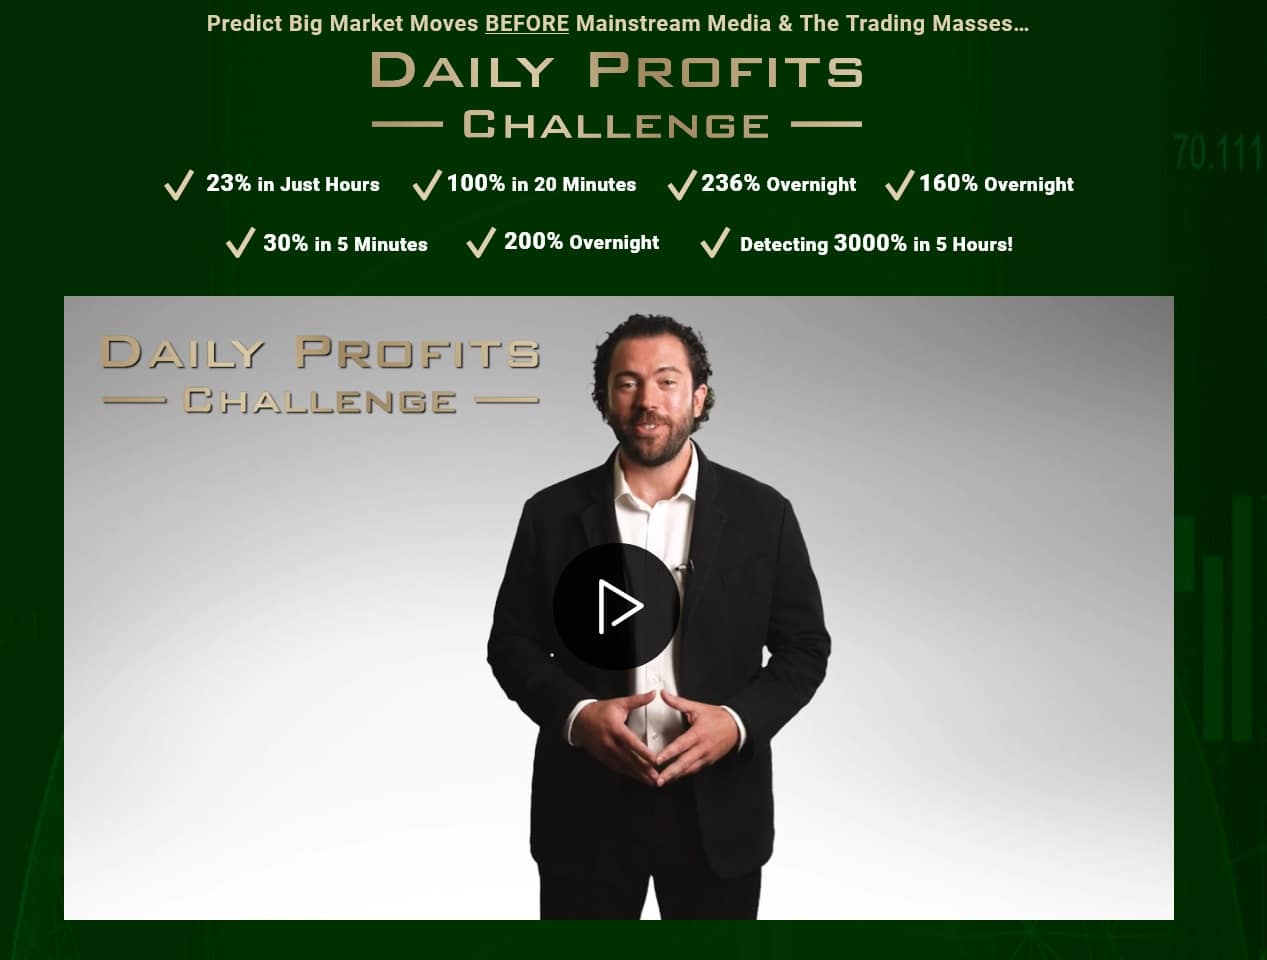 Lance Ippolito’s Daily Profits War Room Review - Daily Profits Challenge